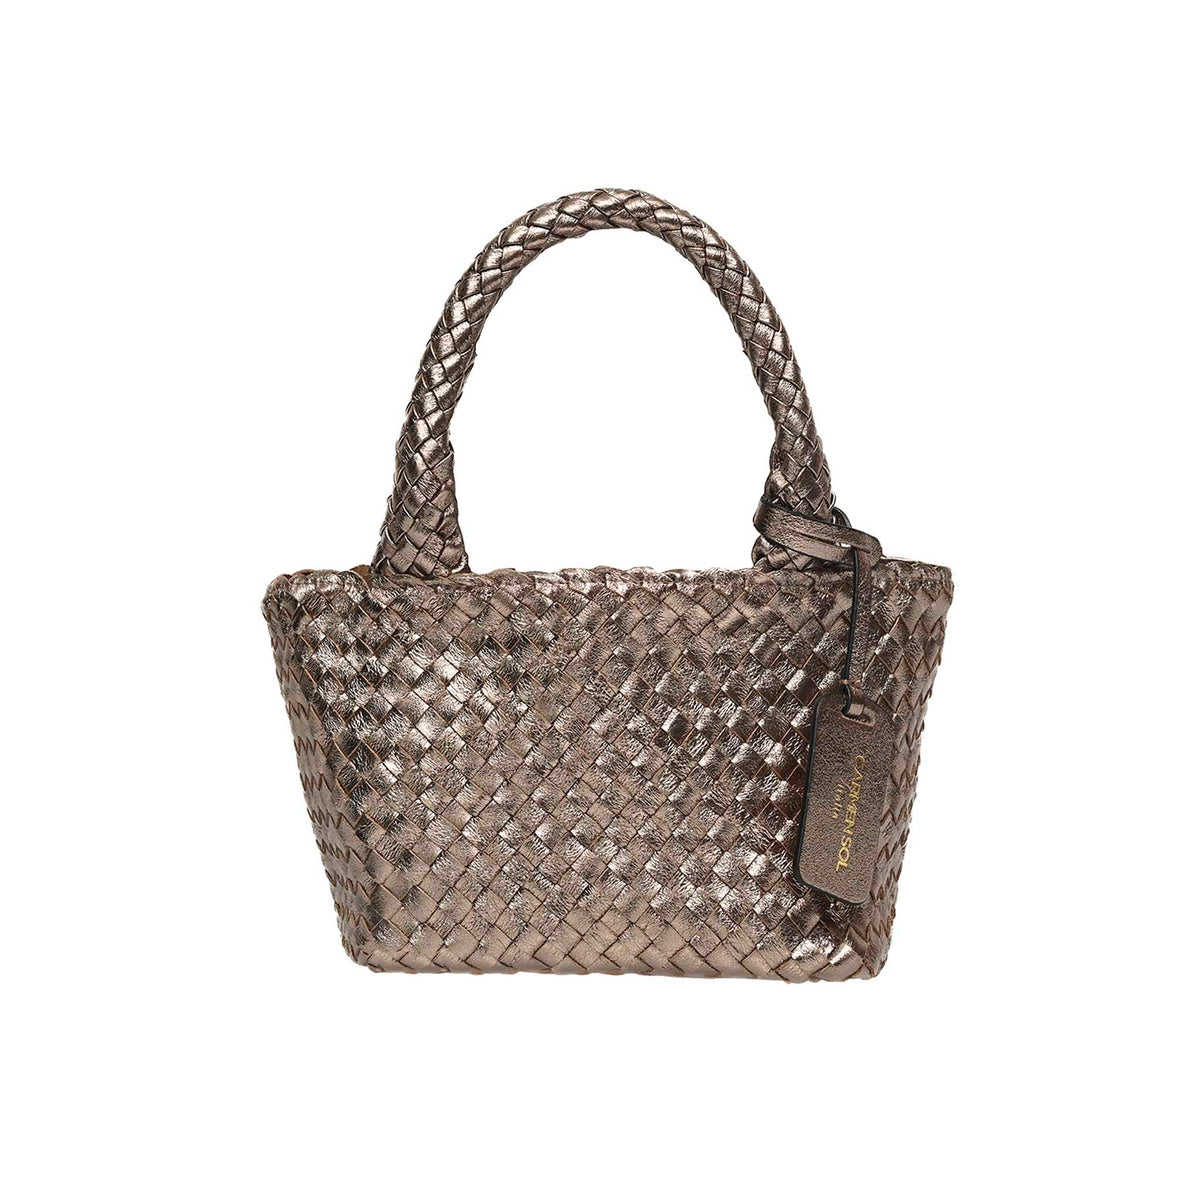 Gold mini leather bag from Carmen Sol made in Italy Material: hand-woven leather